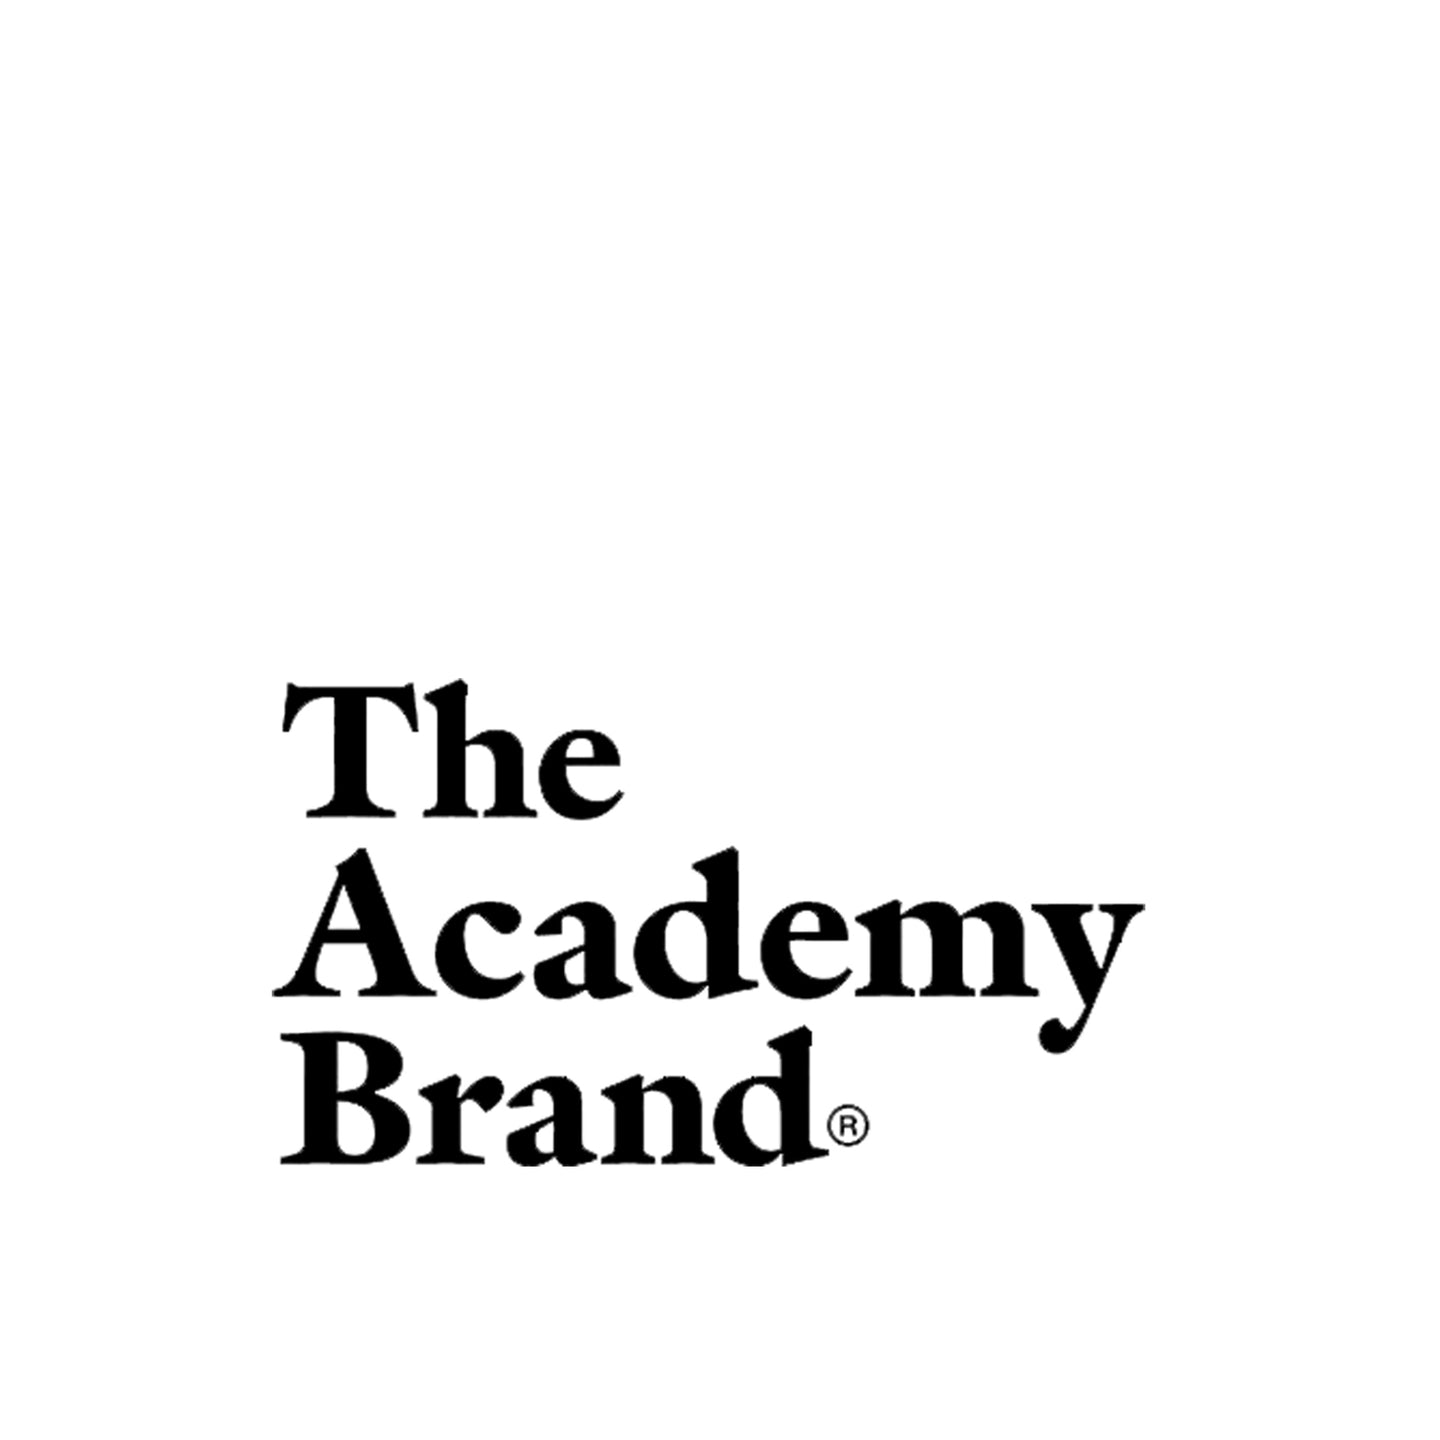 The Academy Brand | available at The Passage Port Fairy | thepassageportfairy.com.au | Surf + Lifestyle + Clothing + Fashion | Mens + Womens + Kids + Boys + Girls